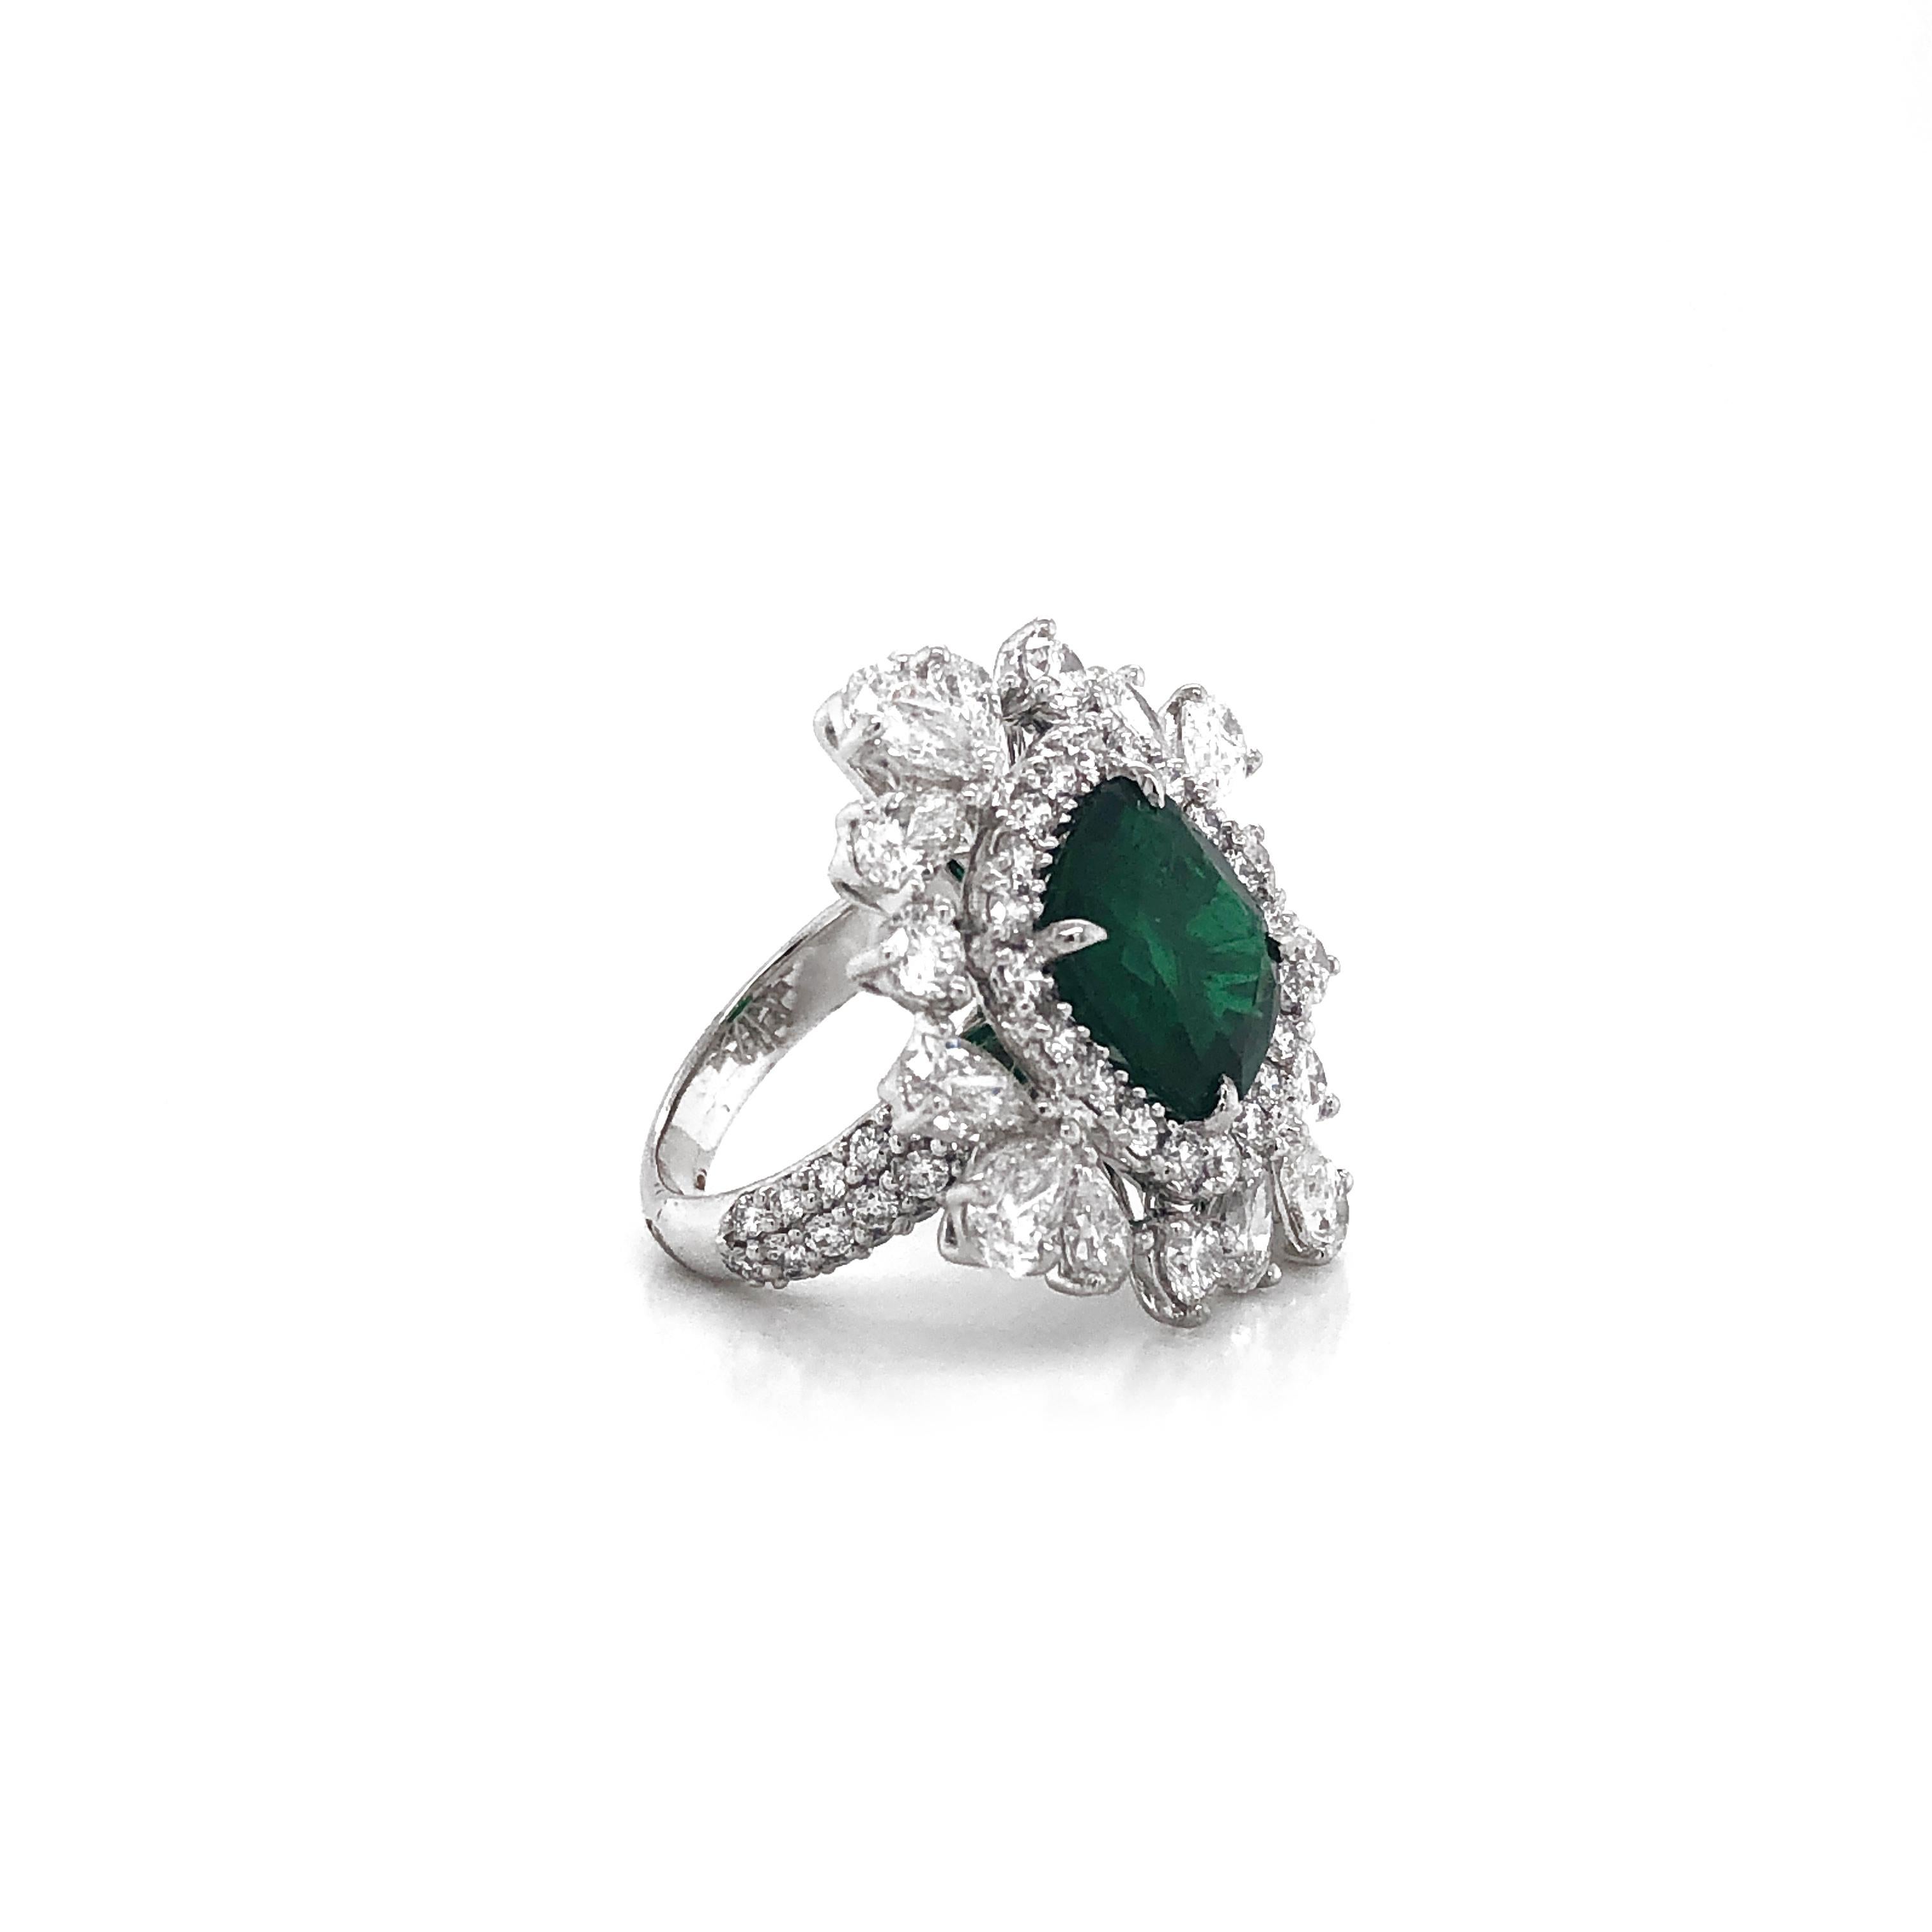 Certified Zambian Cushion Cut Emerald 4.65 Carat Diamond Platinum Cocktail Ring In New Condition For Sale In New York, NY